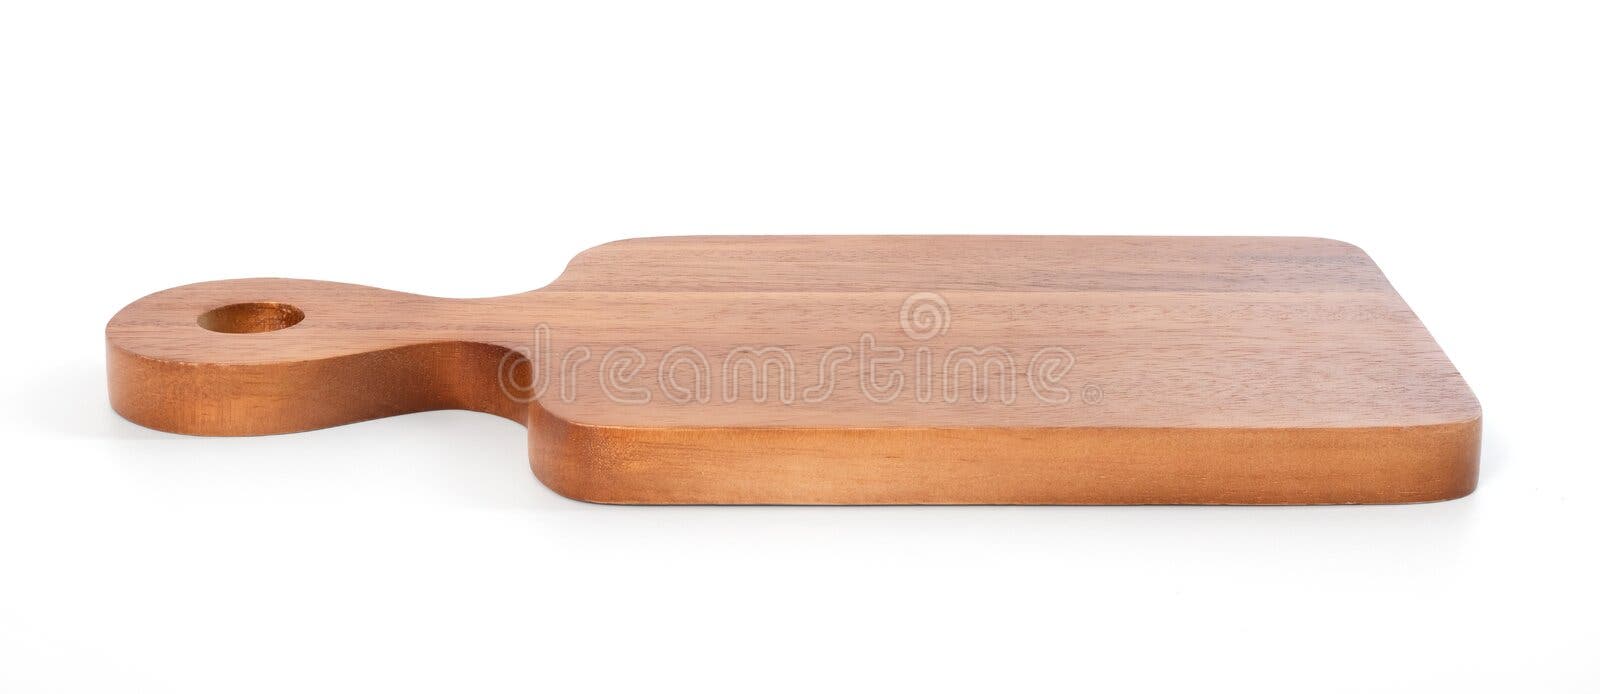 https://thumbs.dreamstime.com/b/top-view-brown-hardwood-cutting-board-kitchen-accessories-square-shape-handles-hole-hanging-white-background-253821539.jpg?w=1600